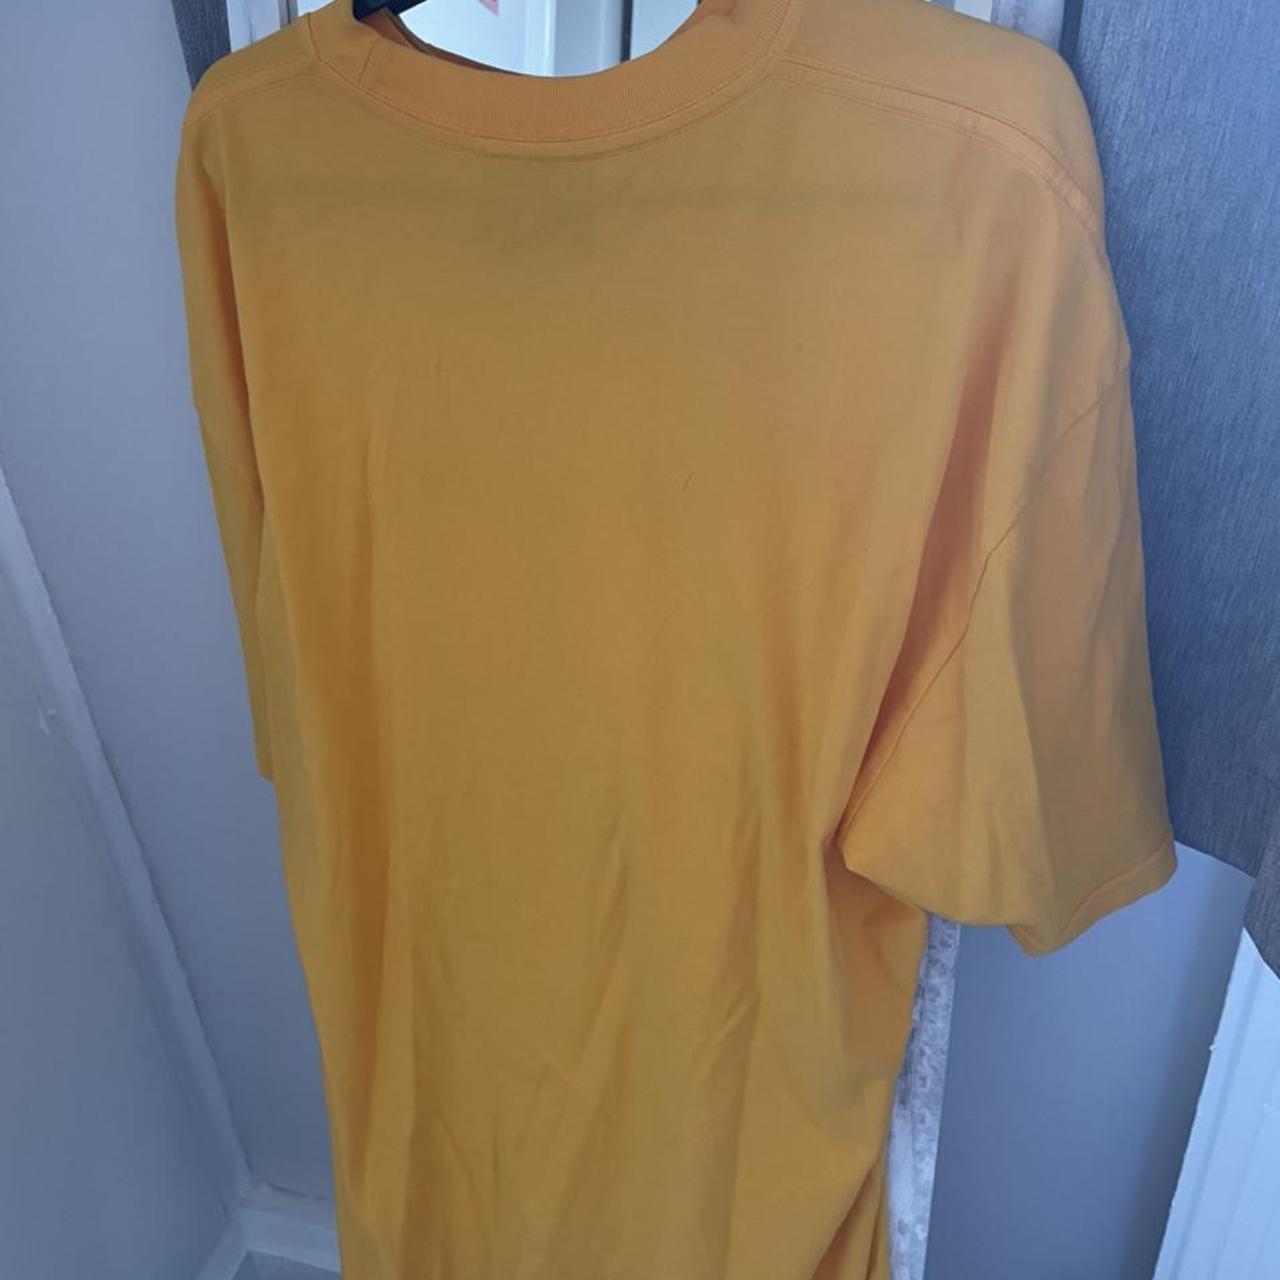 Product Image 3 - Drew house smiley tee

Authentic size